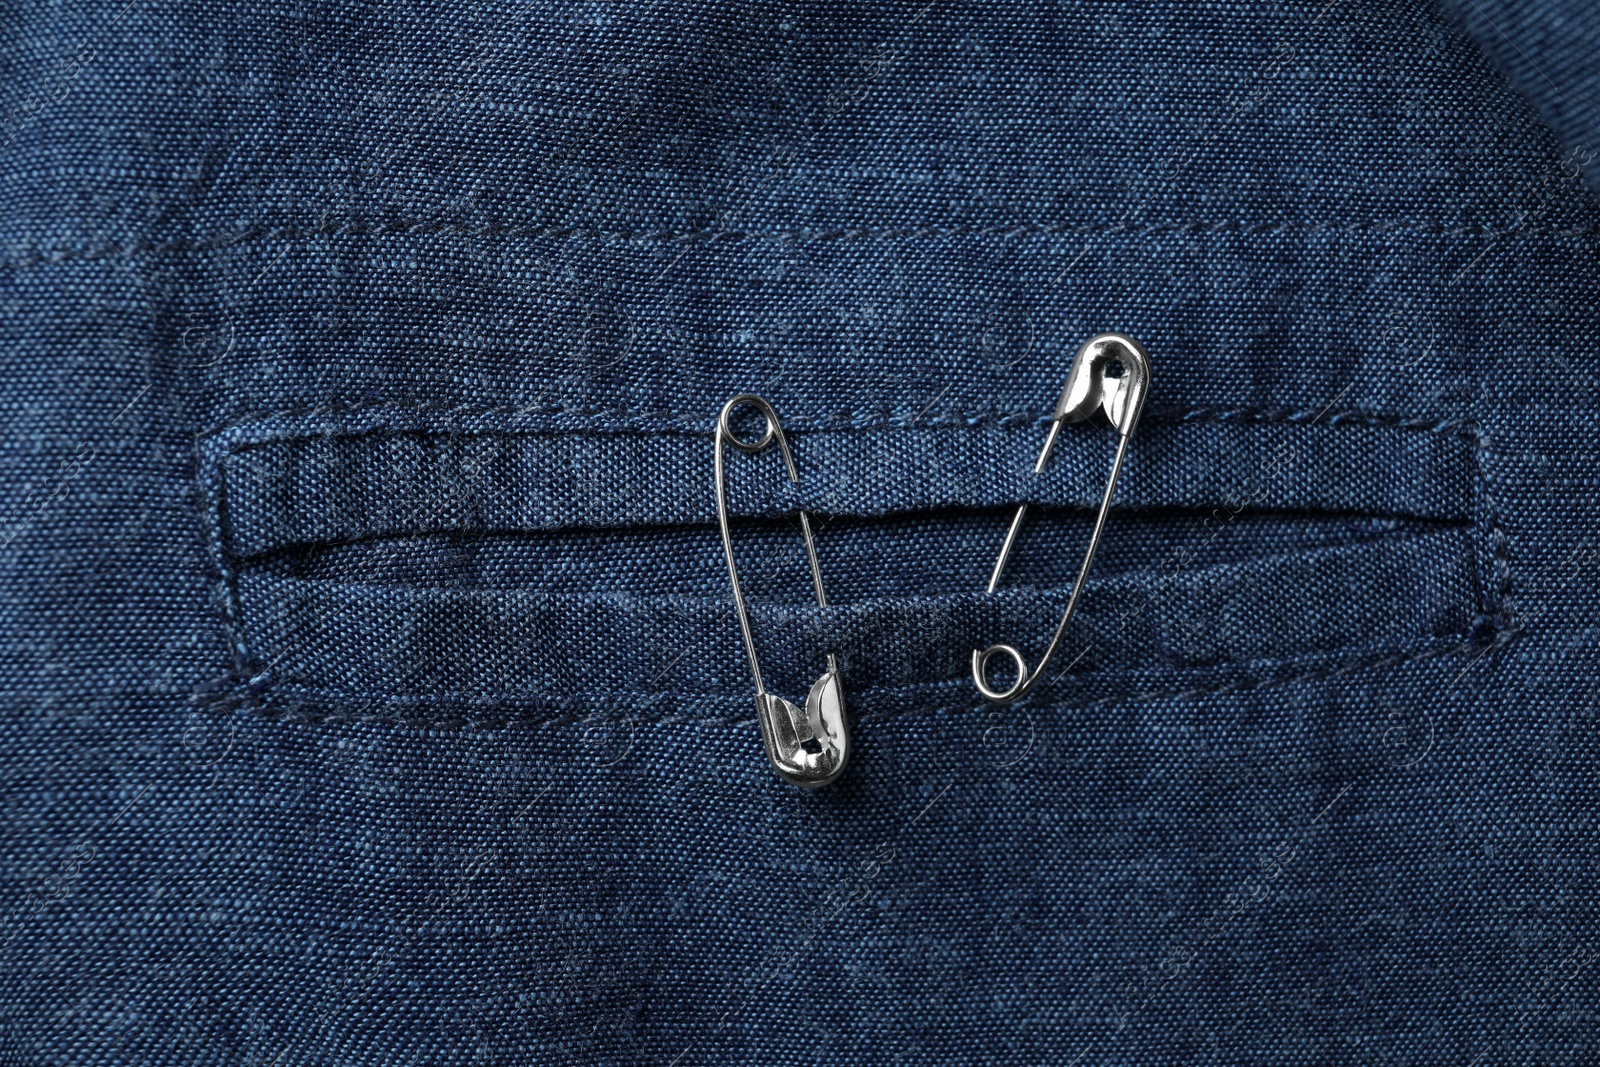 Photo of Top view of metal safety pins on clothing